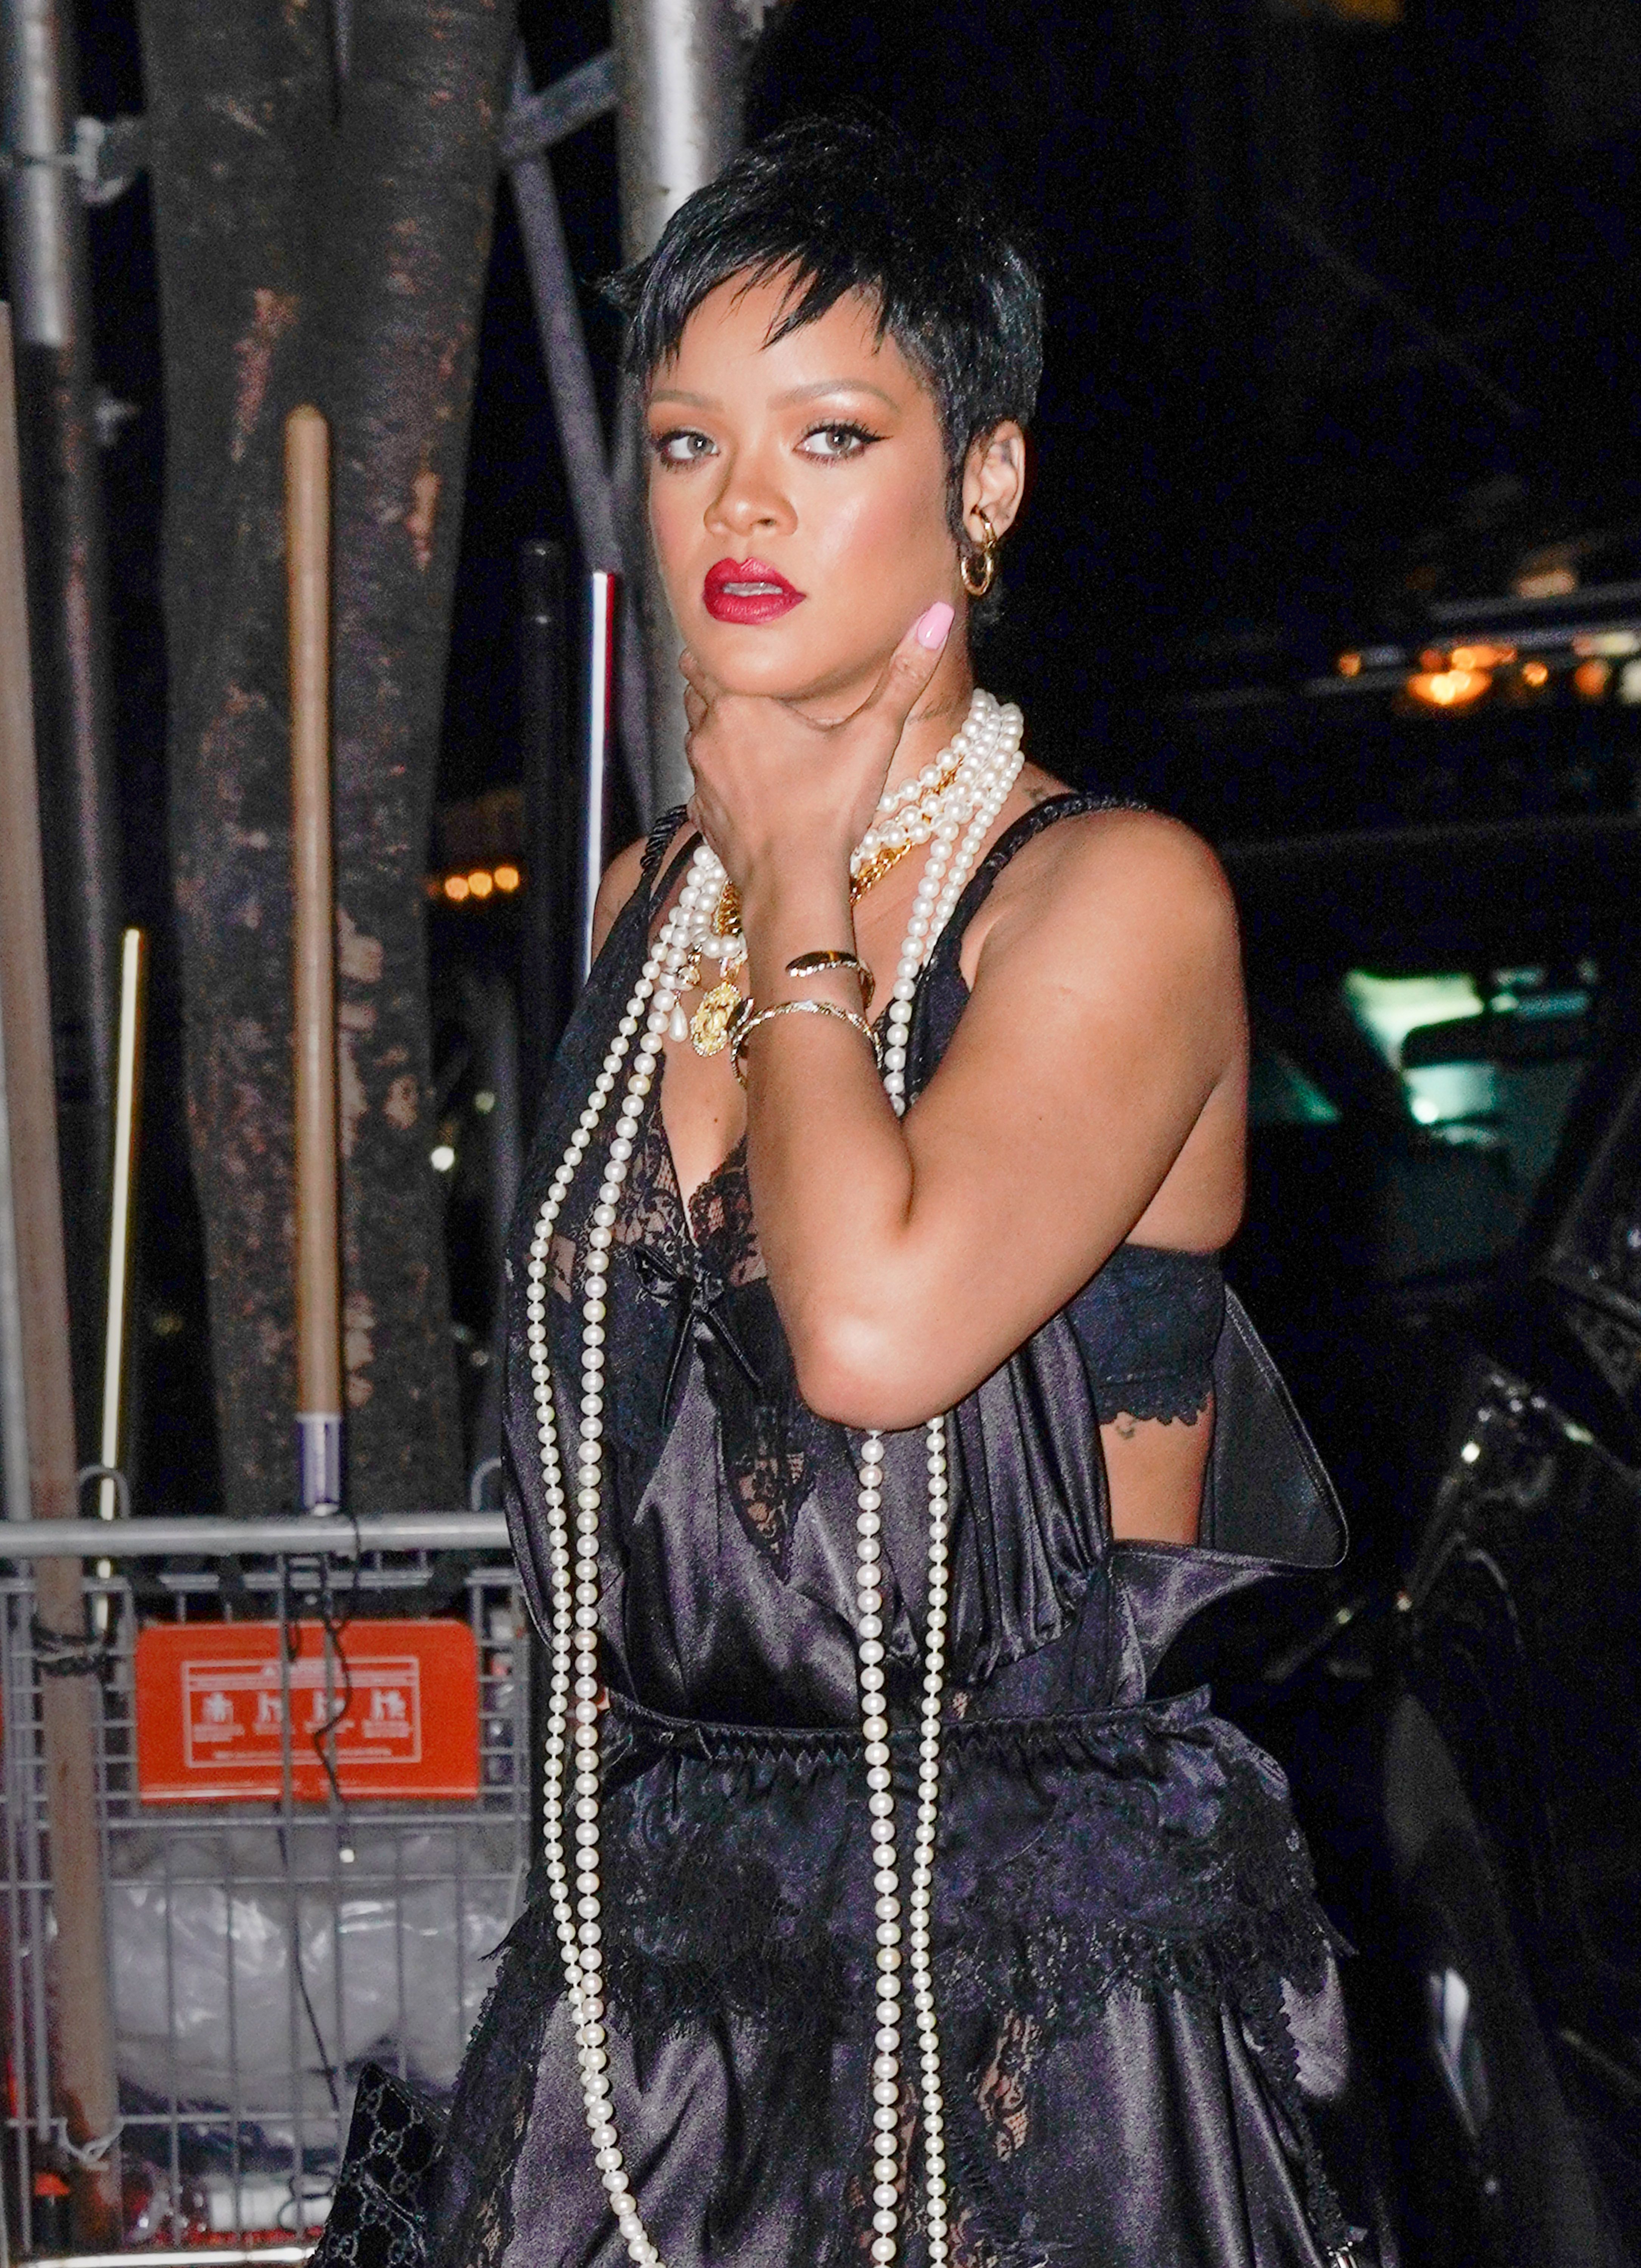 Rihanna Wears Black Lingerie And Pearls For Carbone Dinner